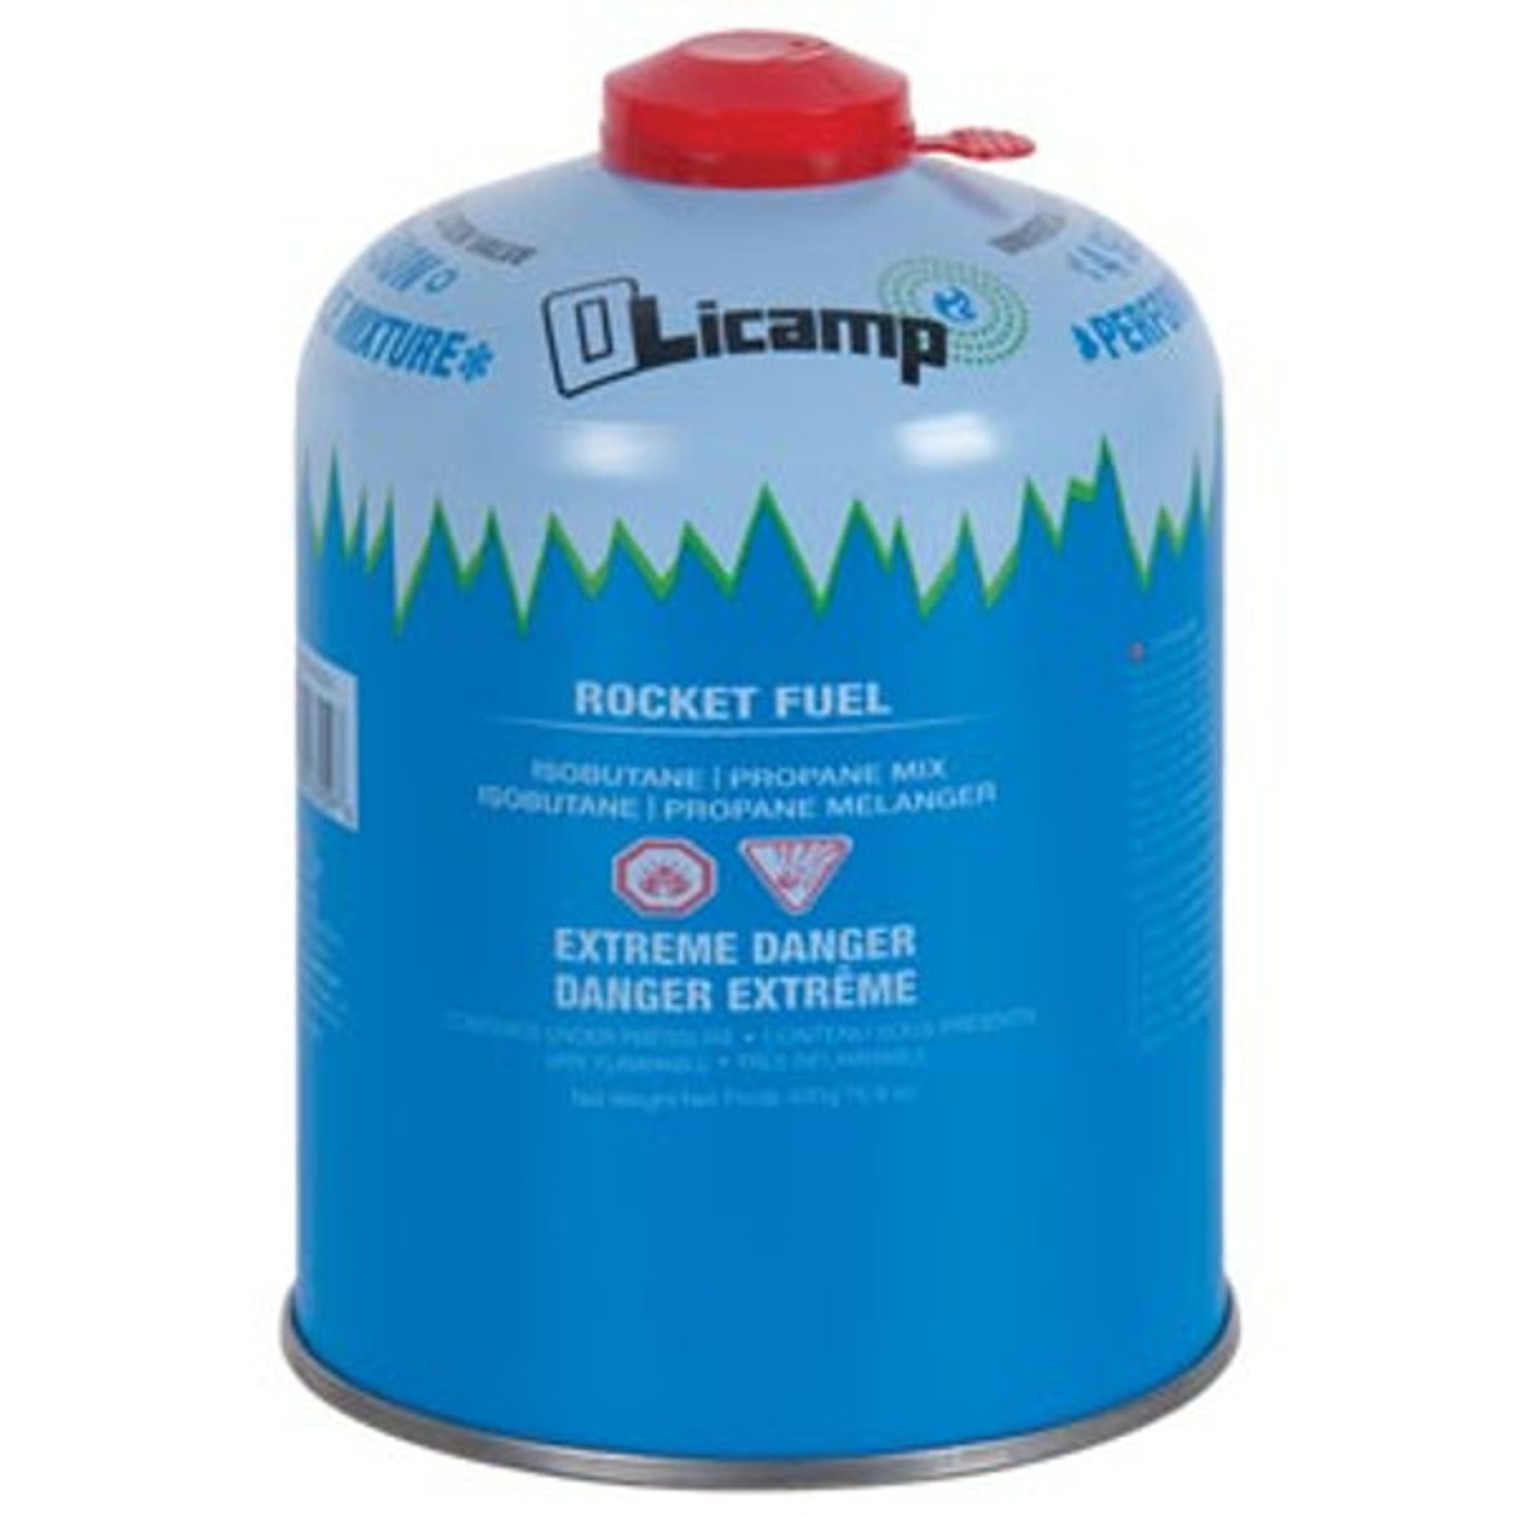 Olicamp Rocket Fuel Canisters - 12 x 450g